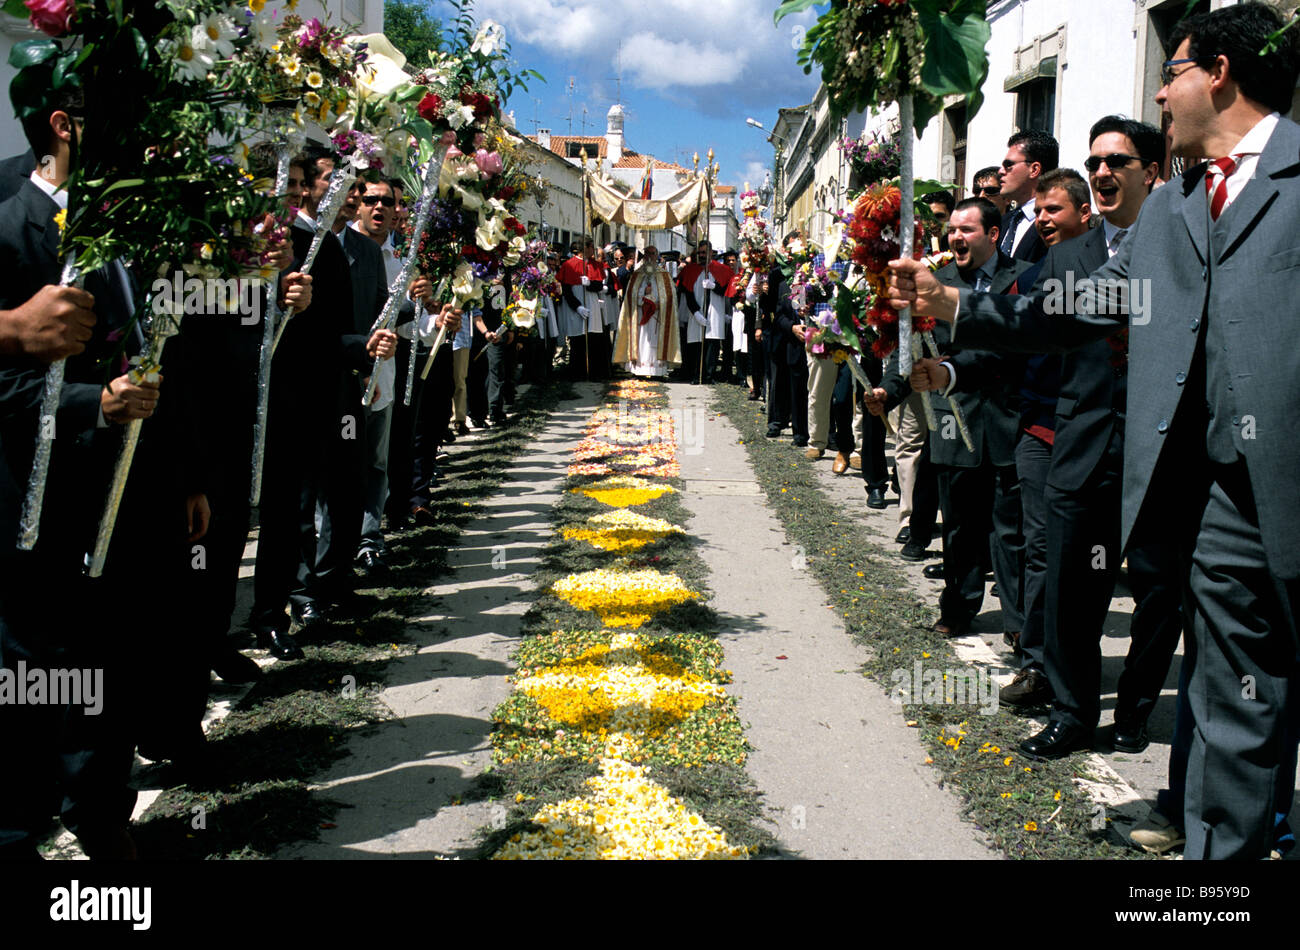 https://c8.alamy.com/comp/B95Y9D/the-festival-of-the-flower-torches-a-traditional-easter-parade-that-B95Y9D.jpg